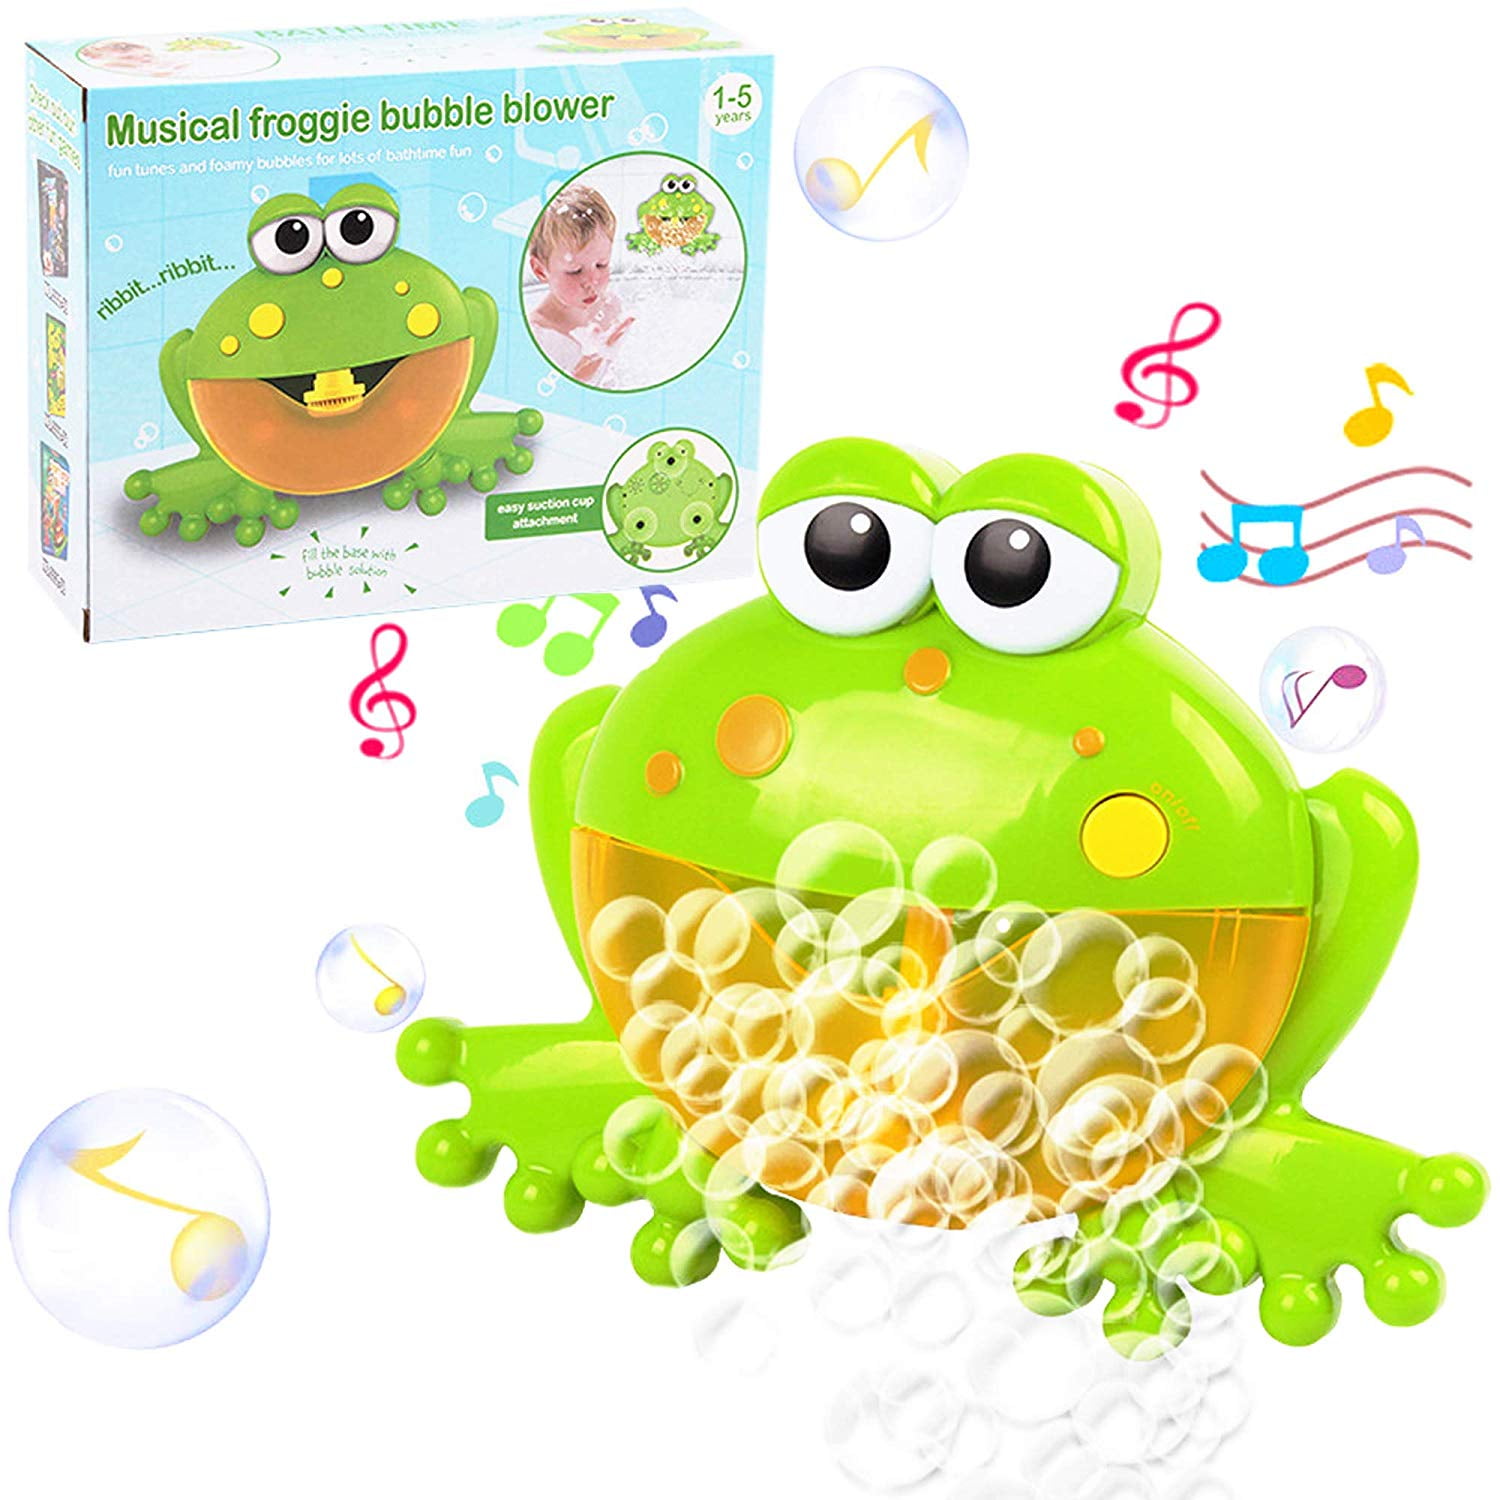 Bubble Machine Big Frogs Automatic Bubble Maker Blower Music Bath Toy For Baby A 